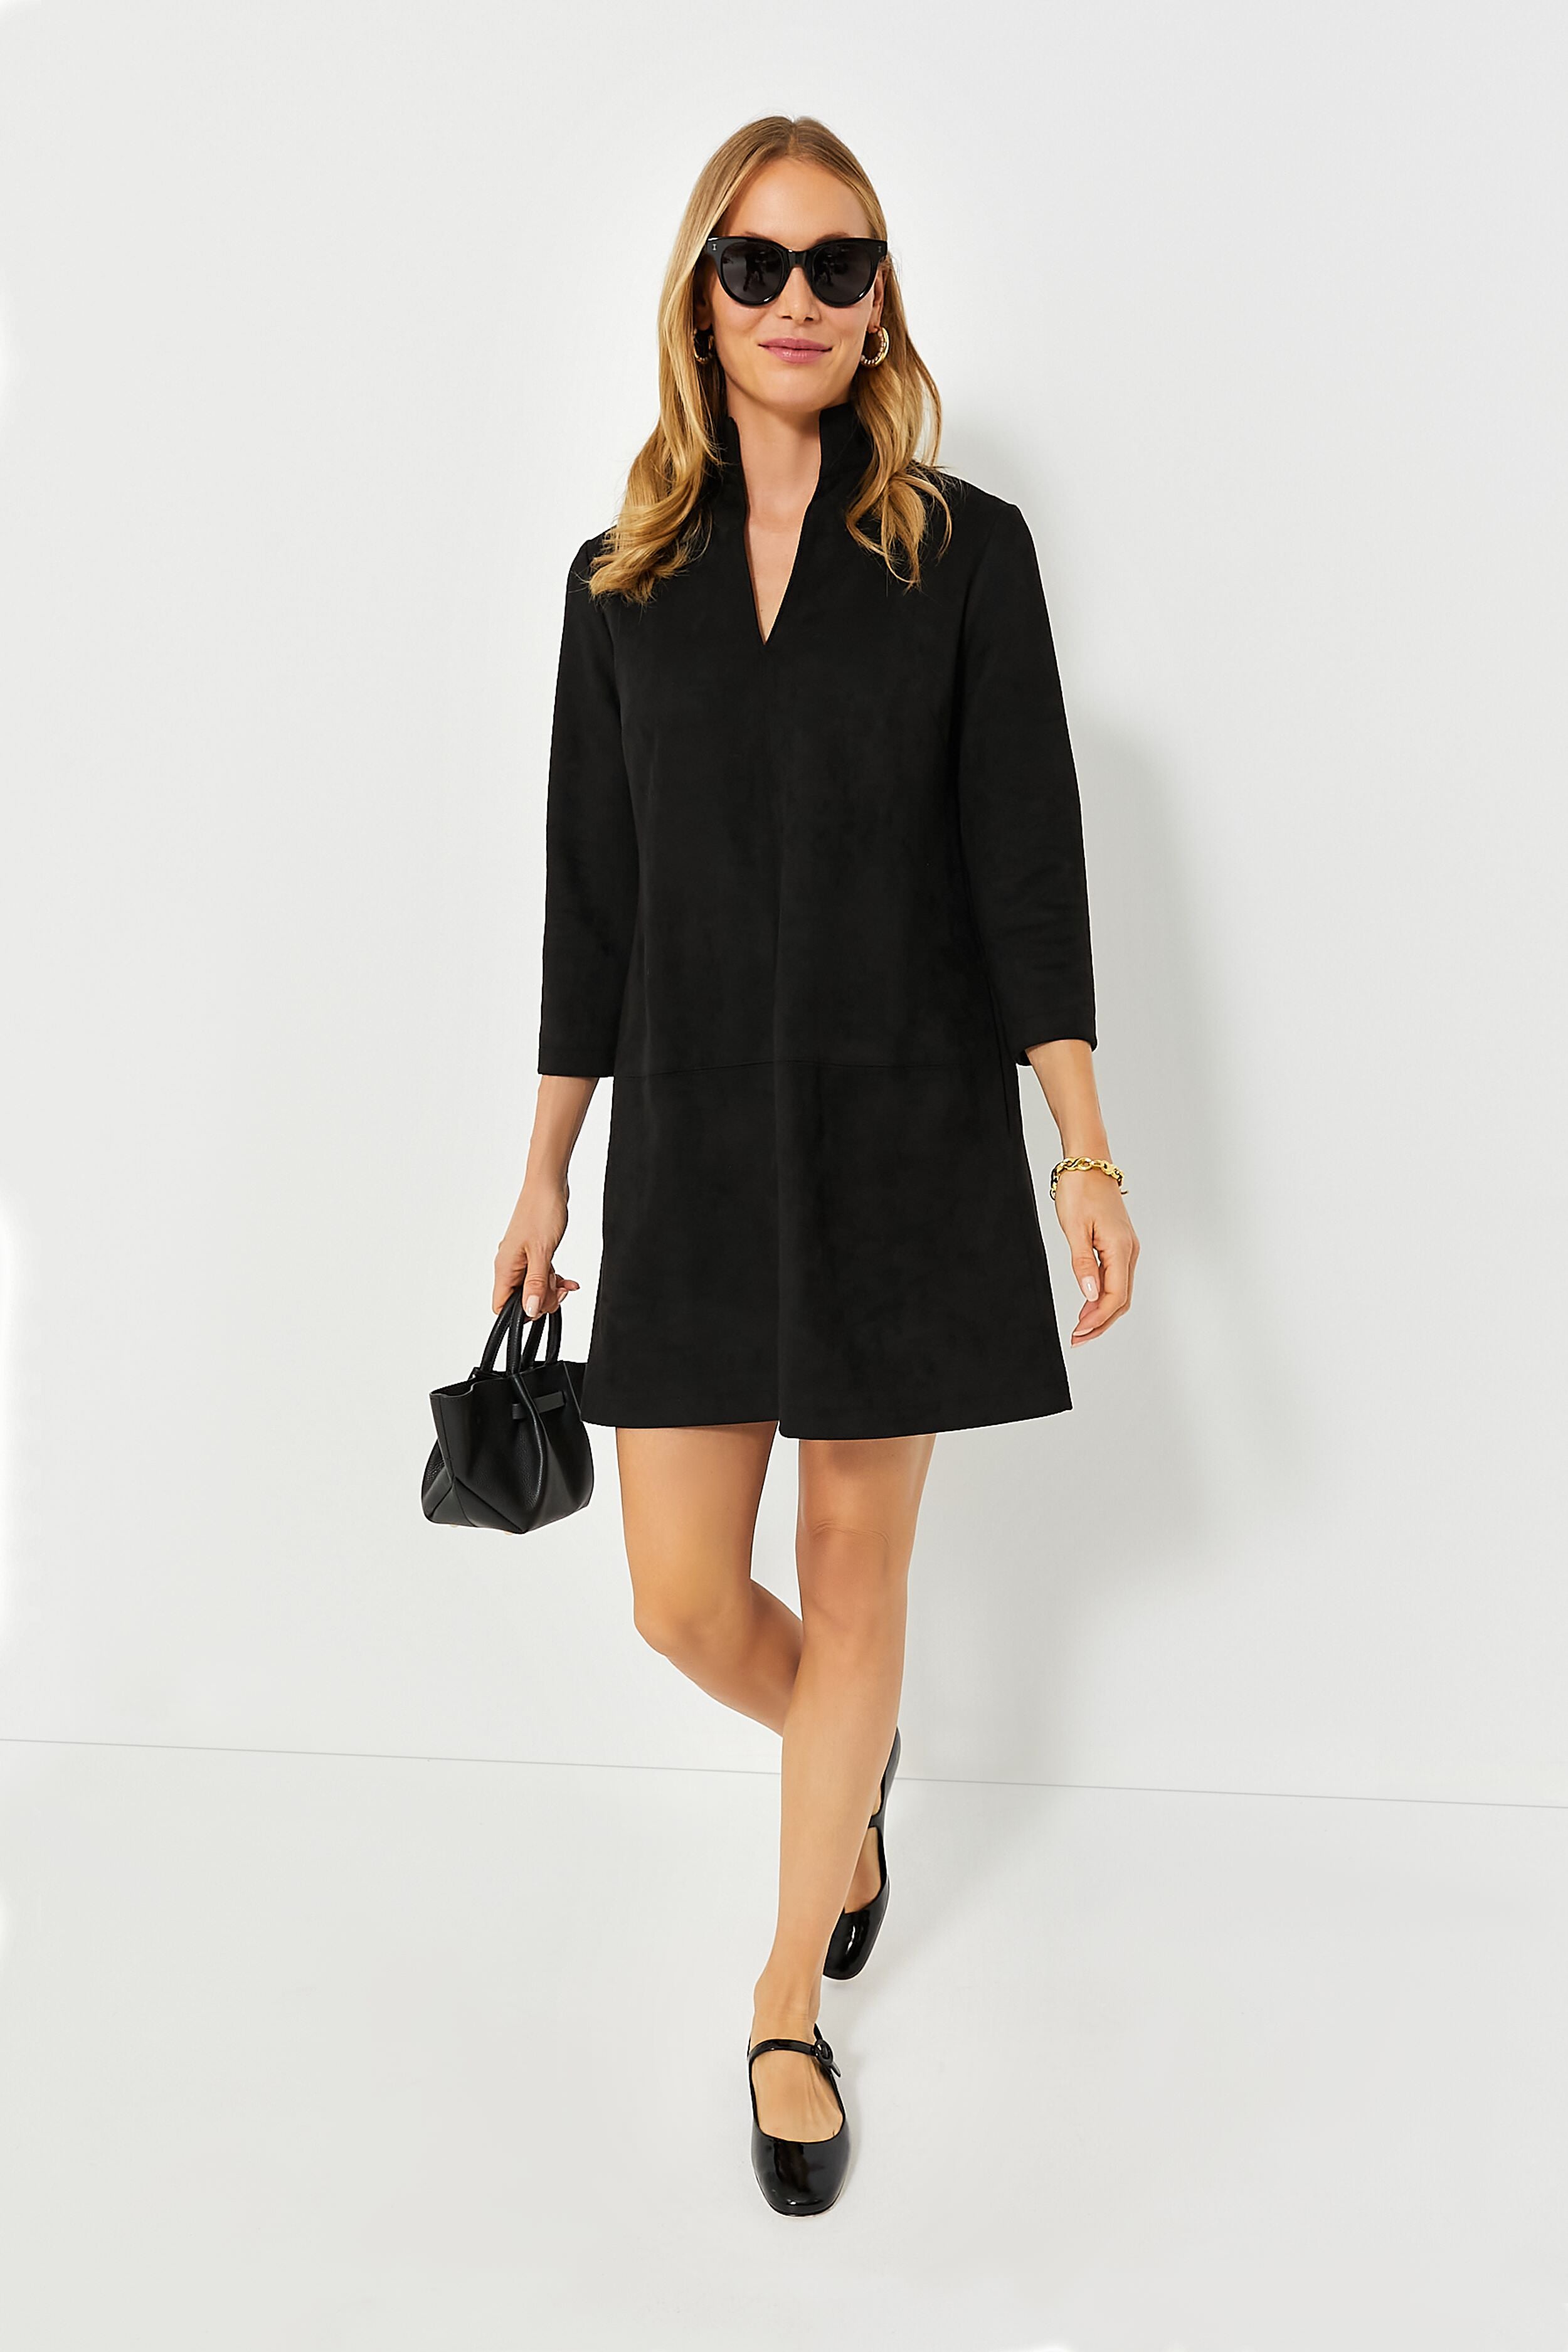 Ladies Classic Black Shift Dress Long Sleeve Covered Button Cuff Knee Length